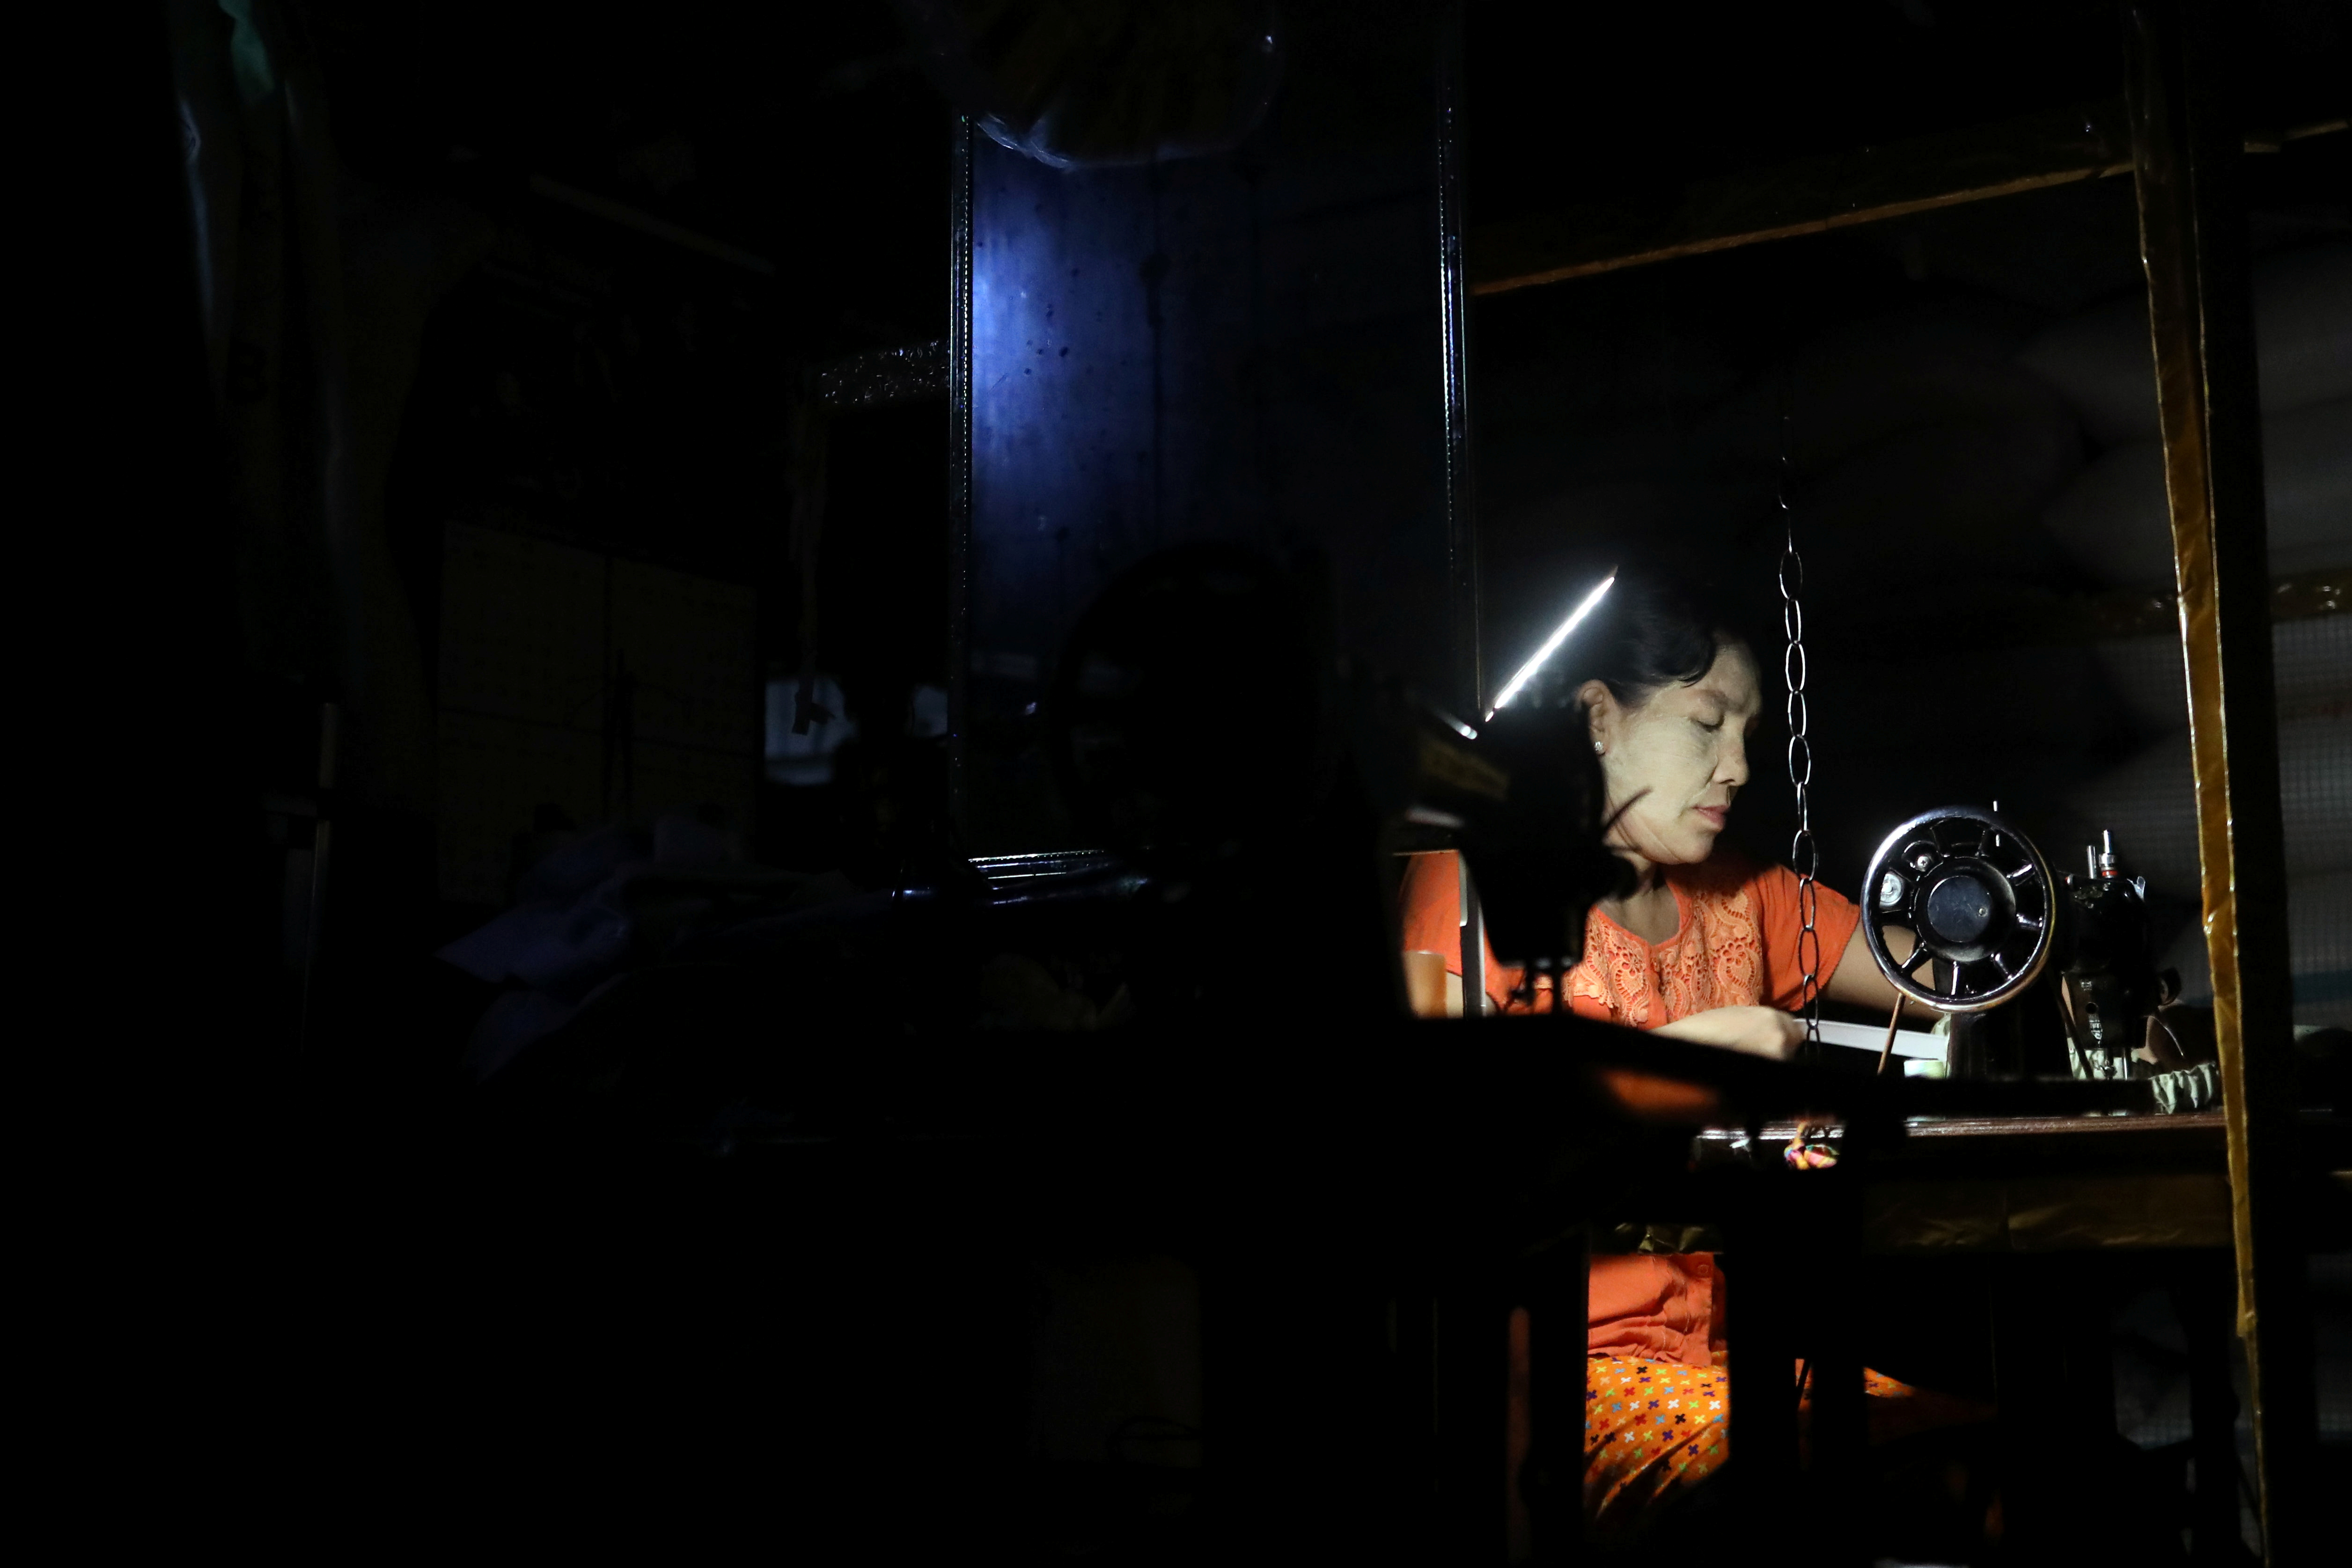 A woman works on her sewing machine with mobile lighting during a power outage in Yangon